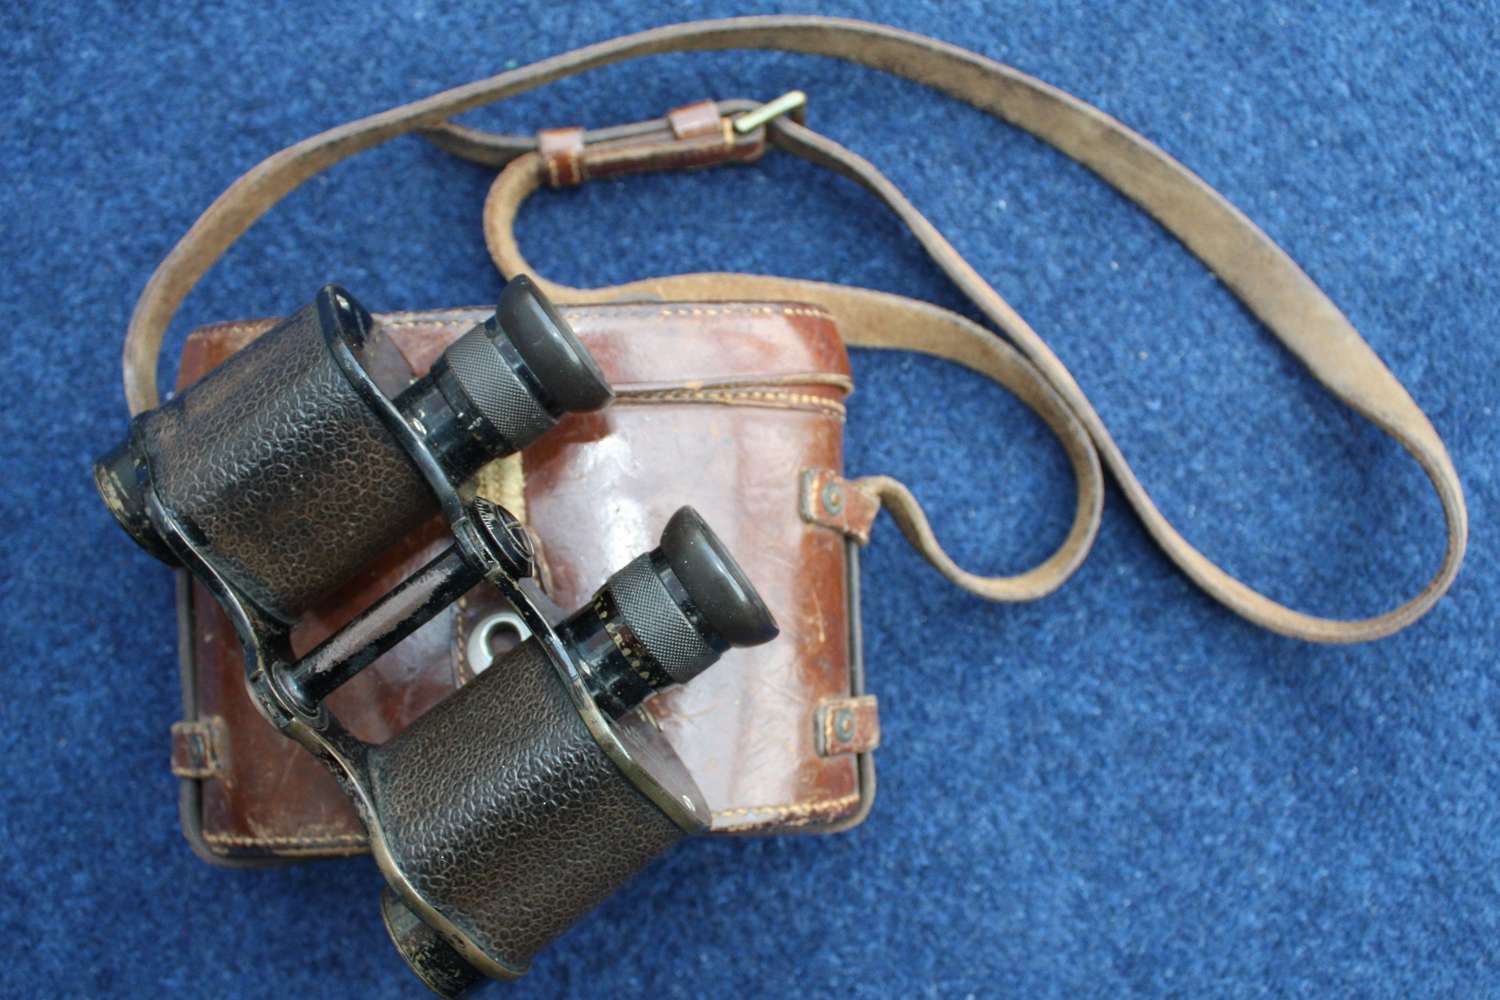 1914 dated WW1 British Army Officer's Ross Binoculars in Leather case.